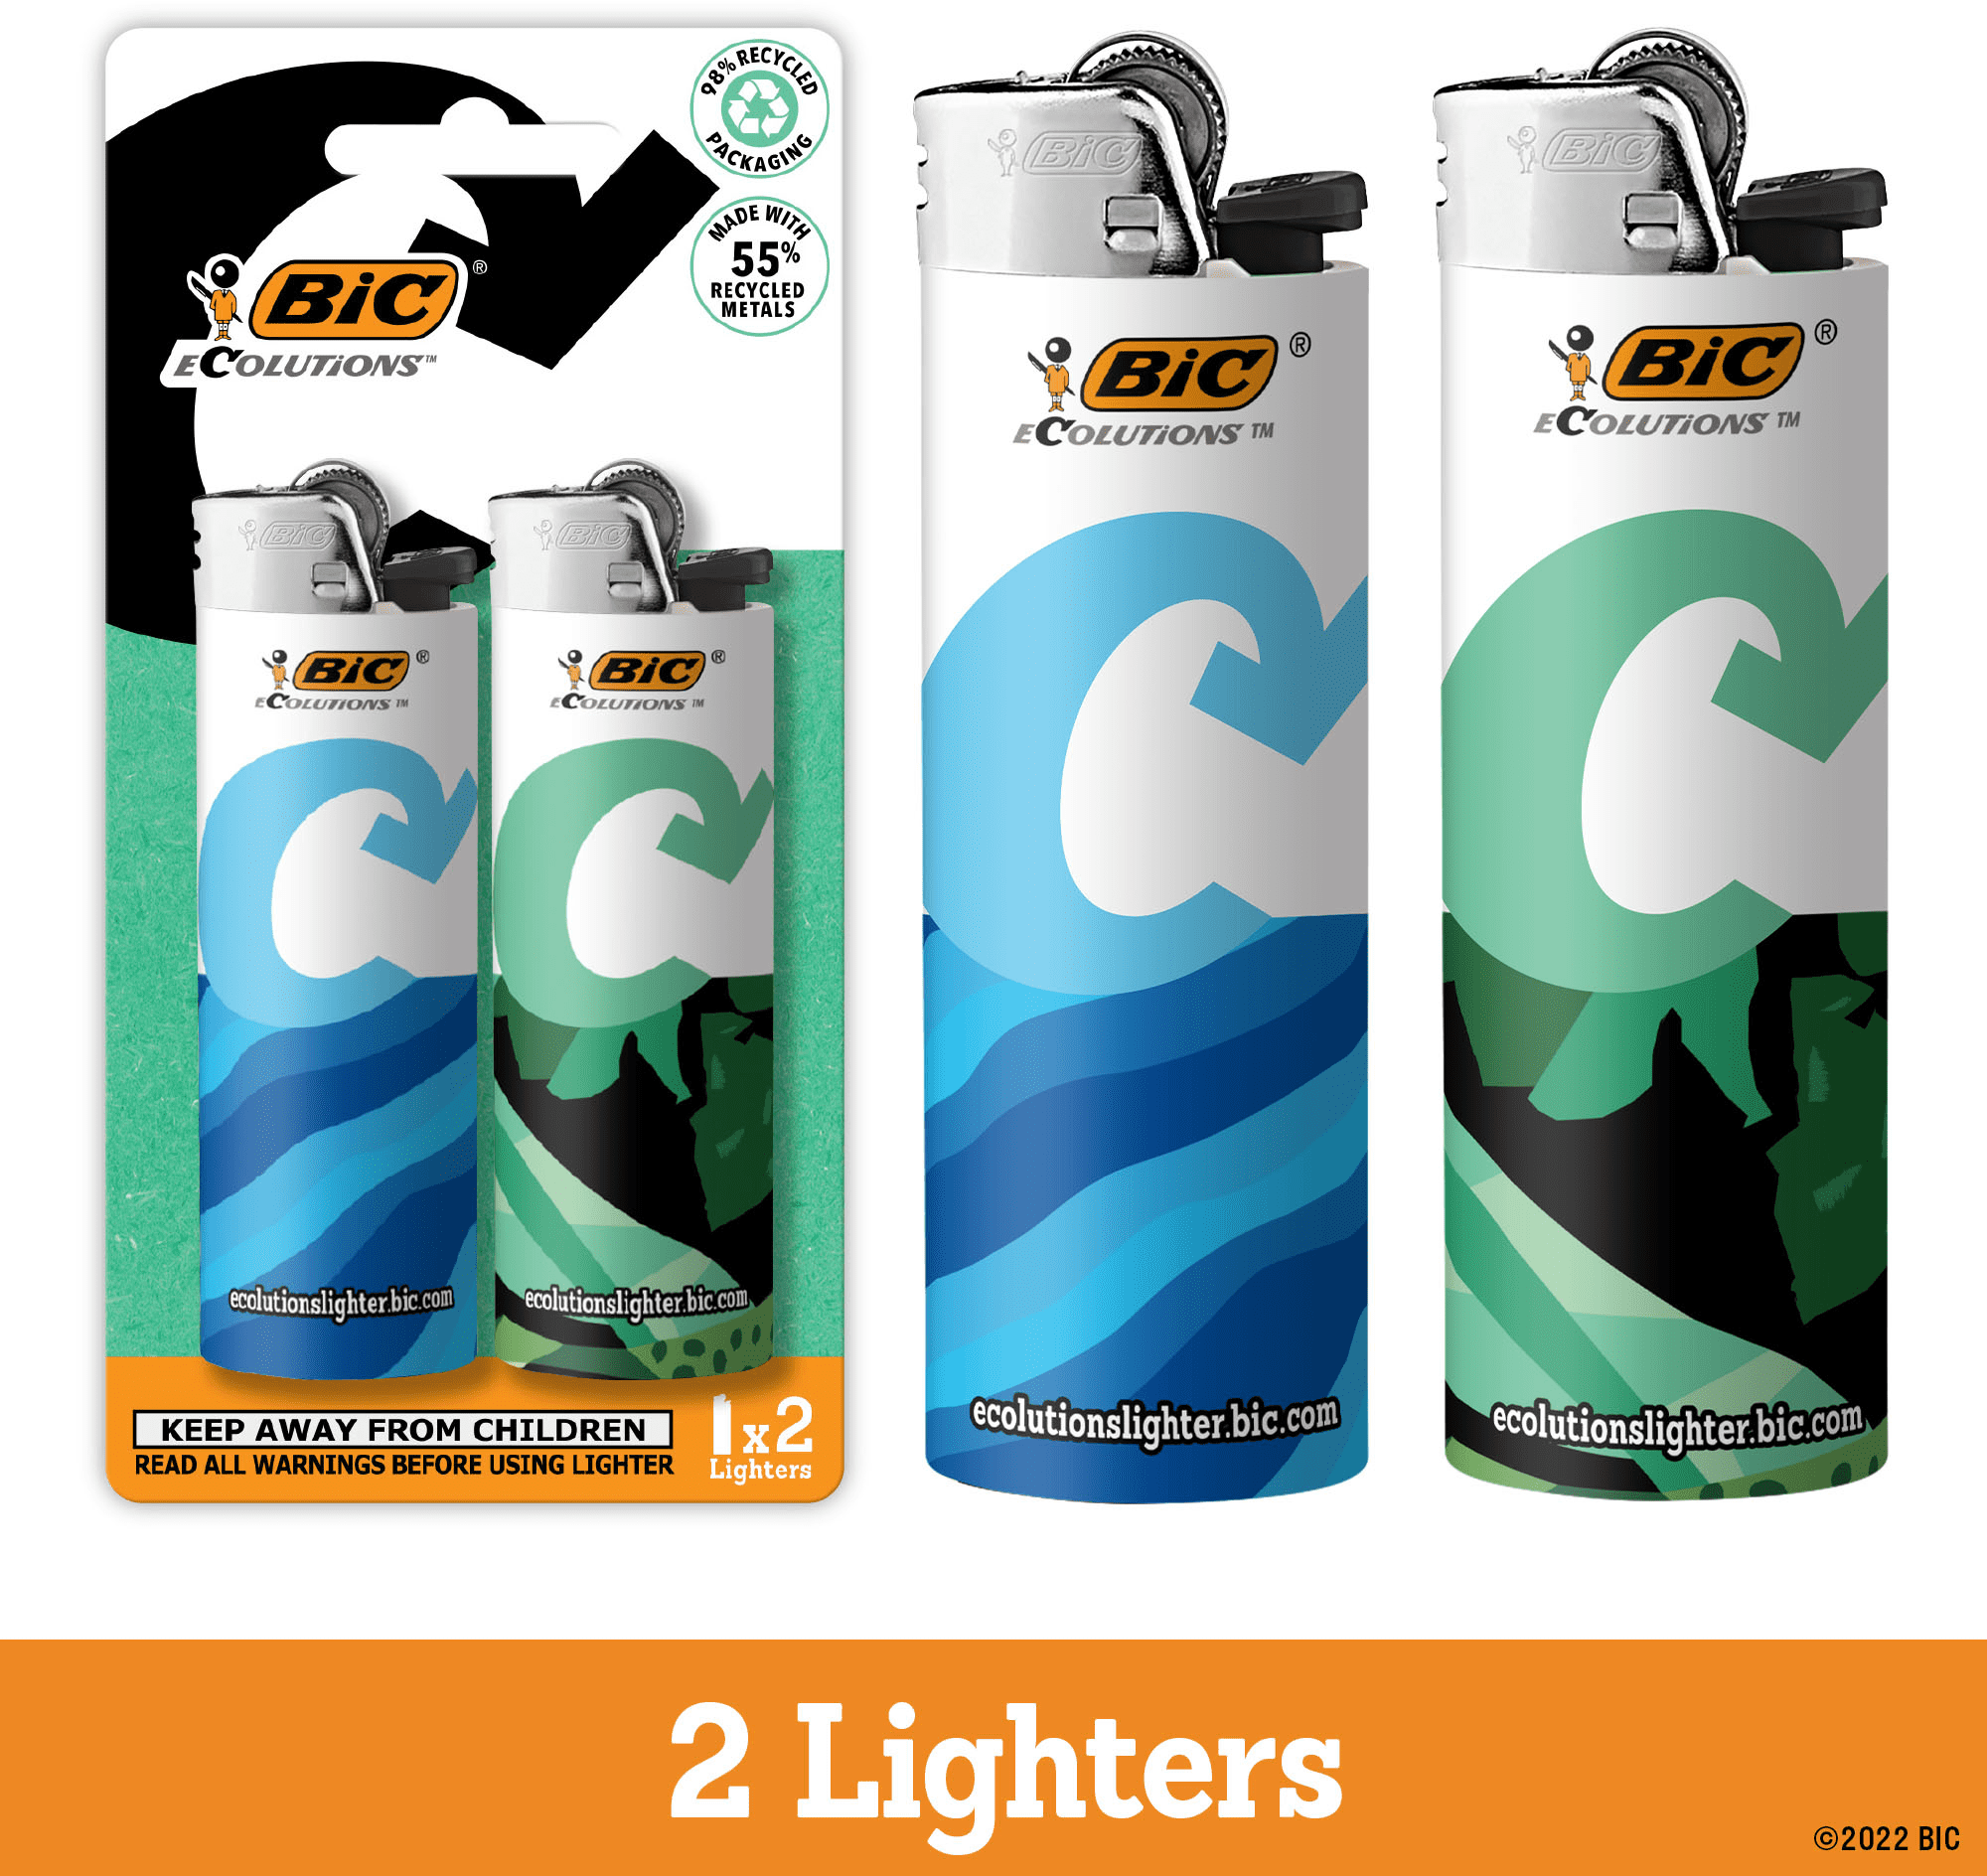 BIC Ecolutions Pocket Lighter, 2-Pack of Ecofriendly Candle Lighters, 98% Recycled Packaging and 55% Recycled Metal, 30% Carbon Offset, 2 Pack